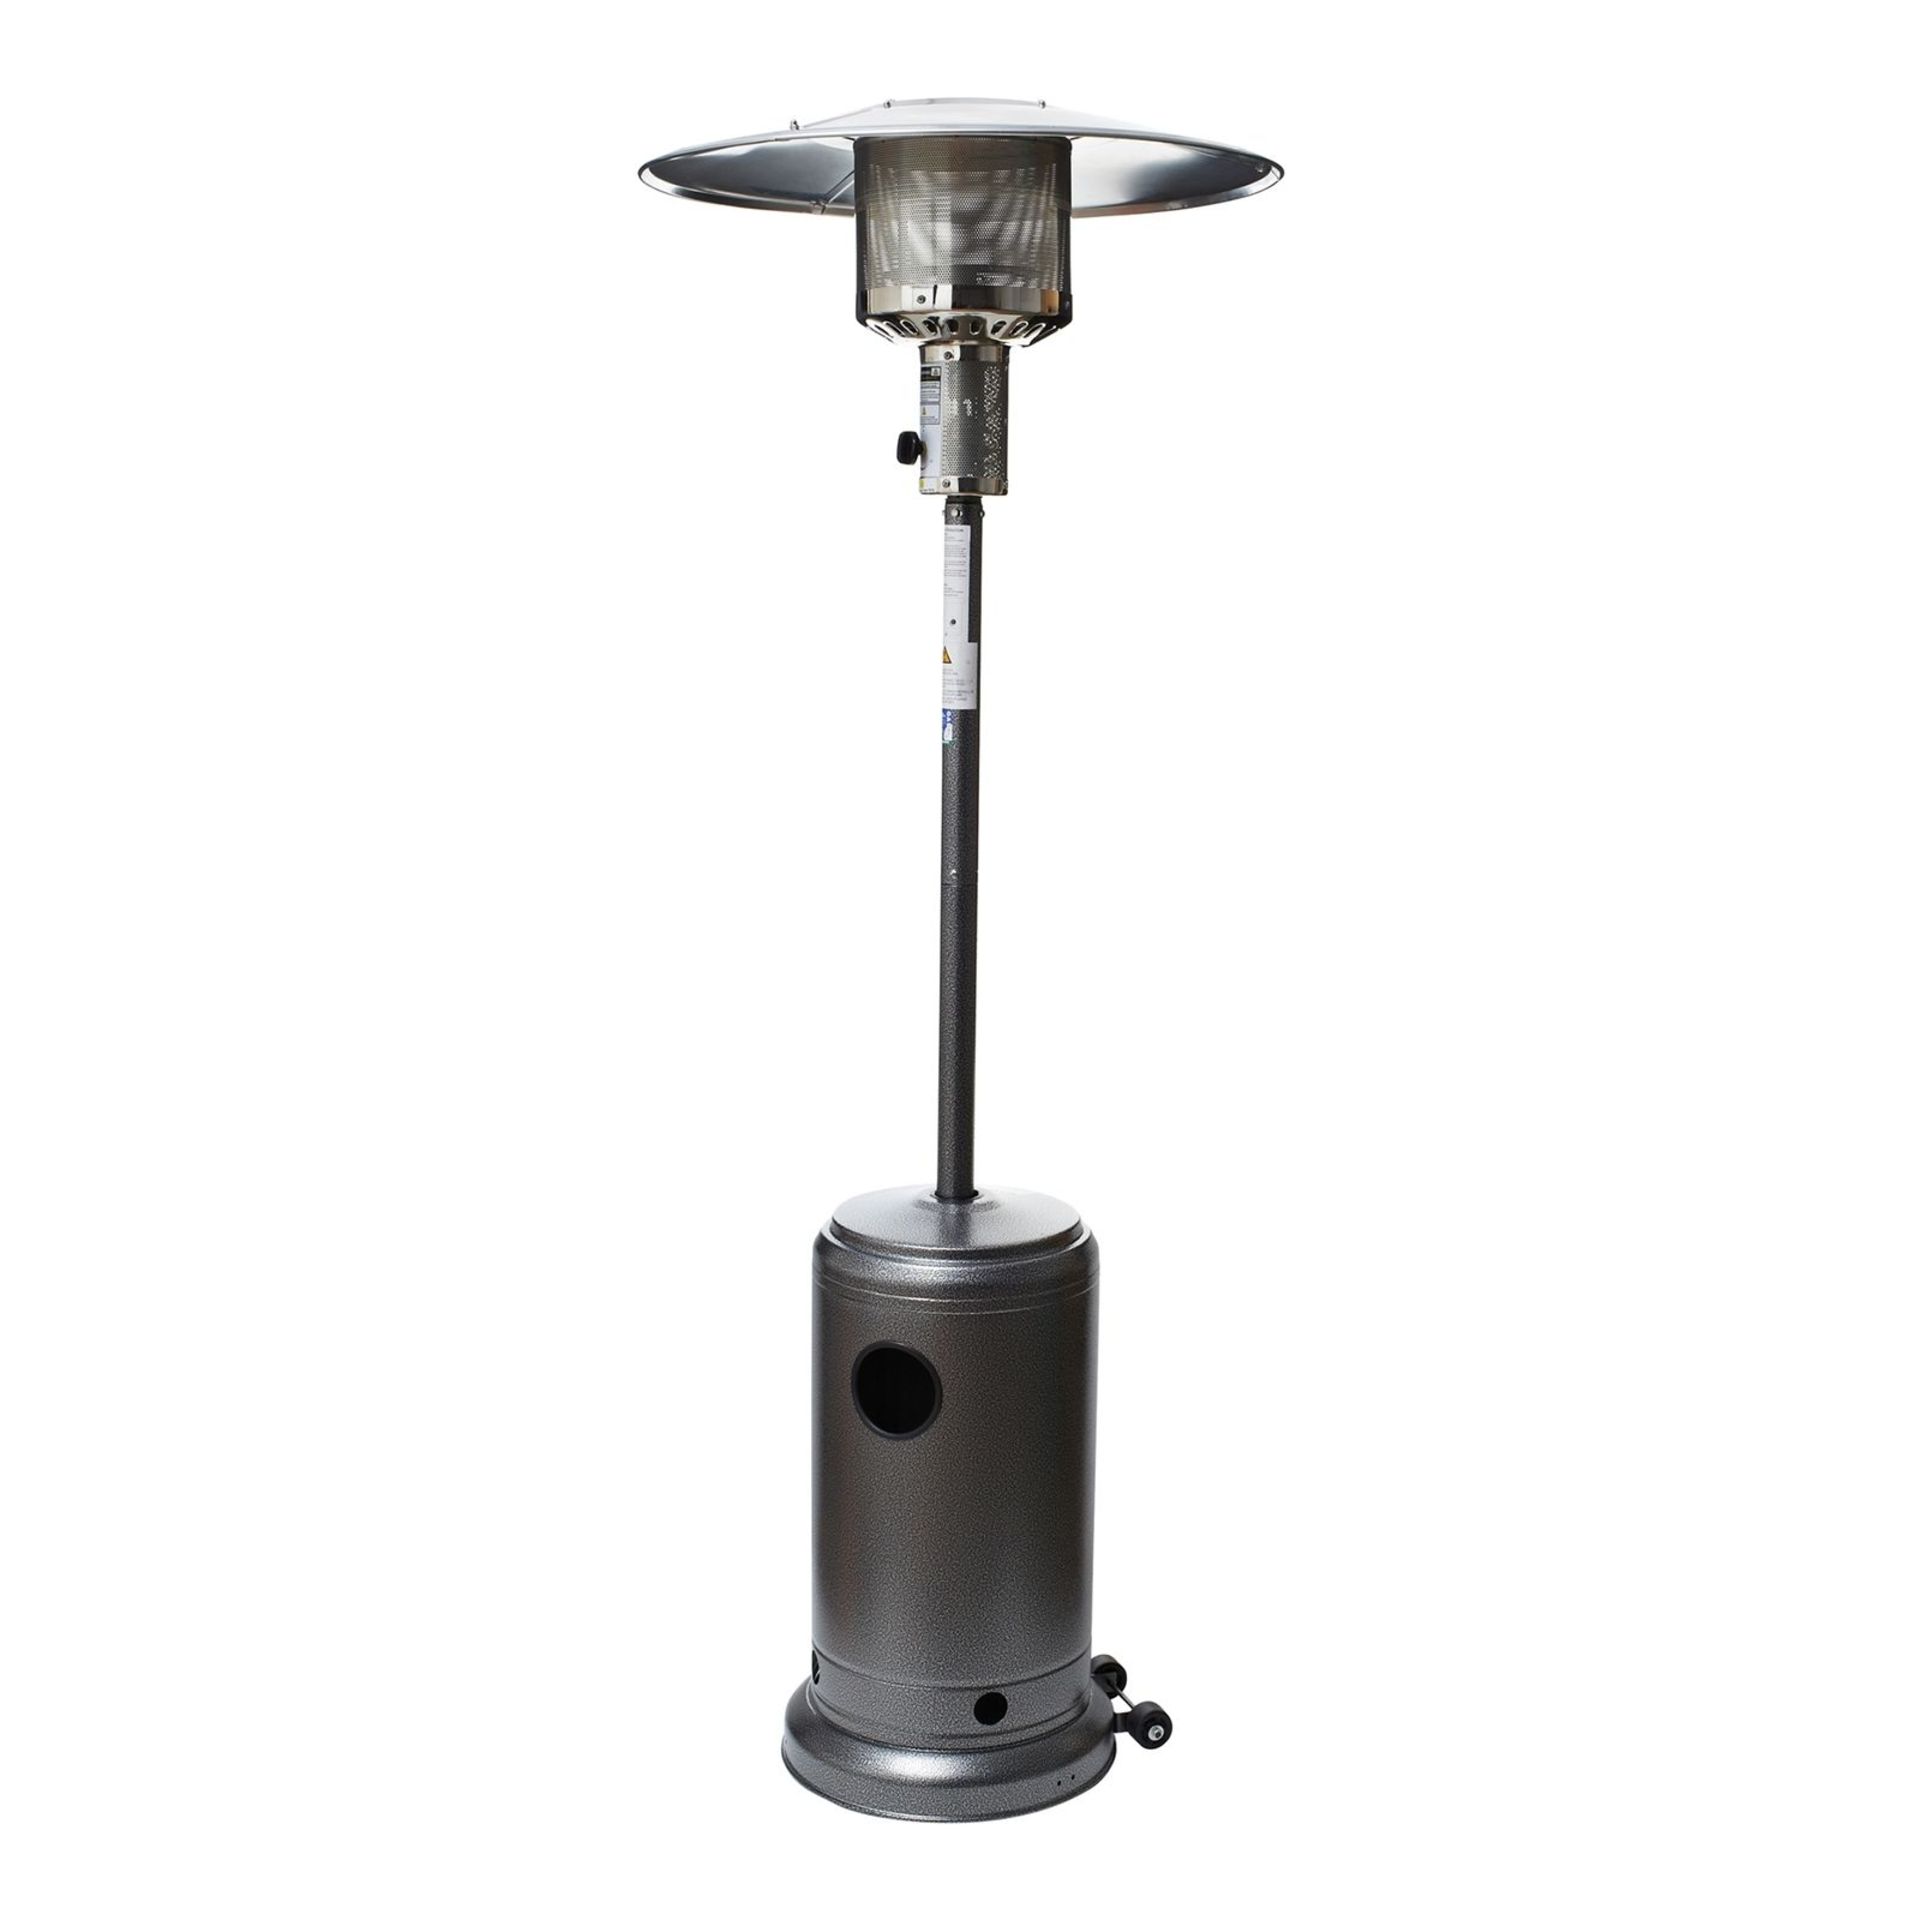 Brand new and boxed, Top Hat Patio Heater